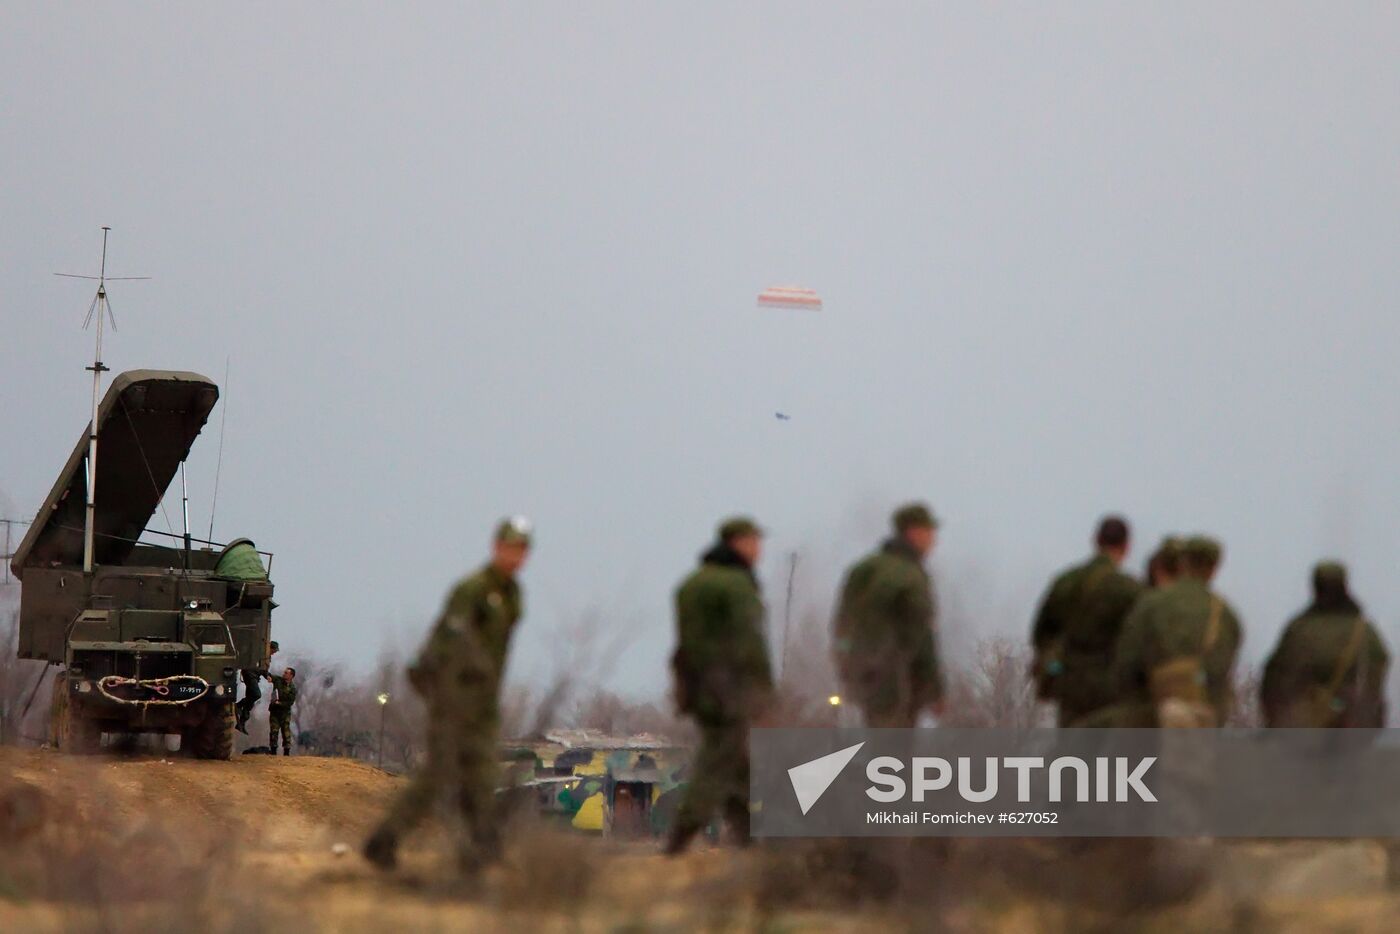 Air Defense soldiers during exercise, Ashuluk firing ground